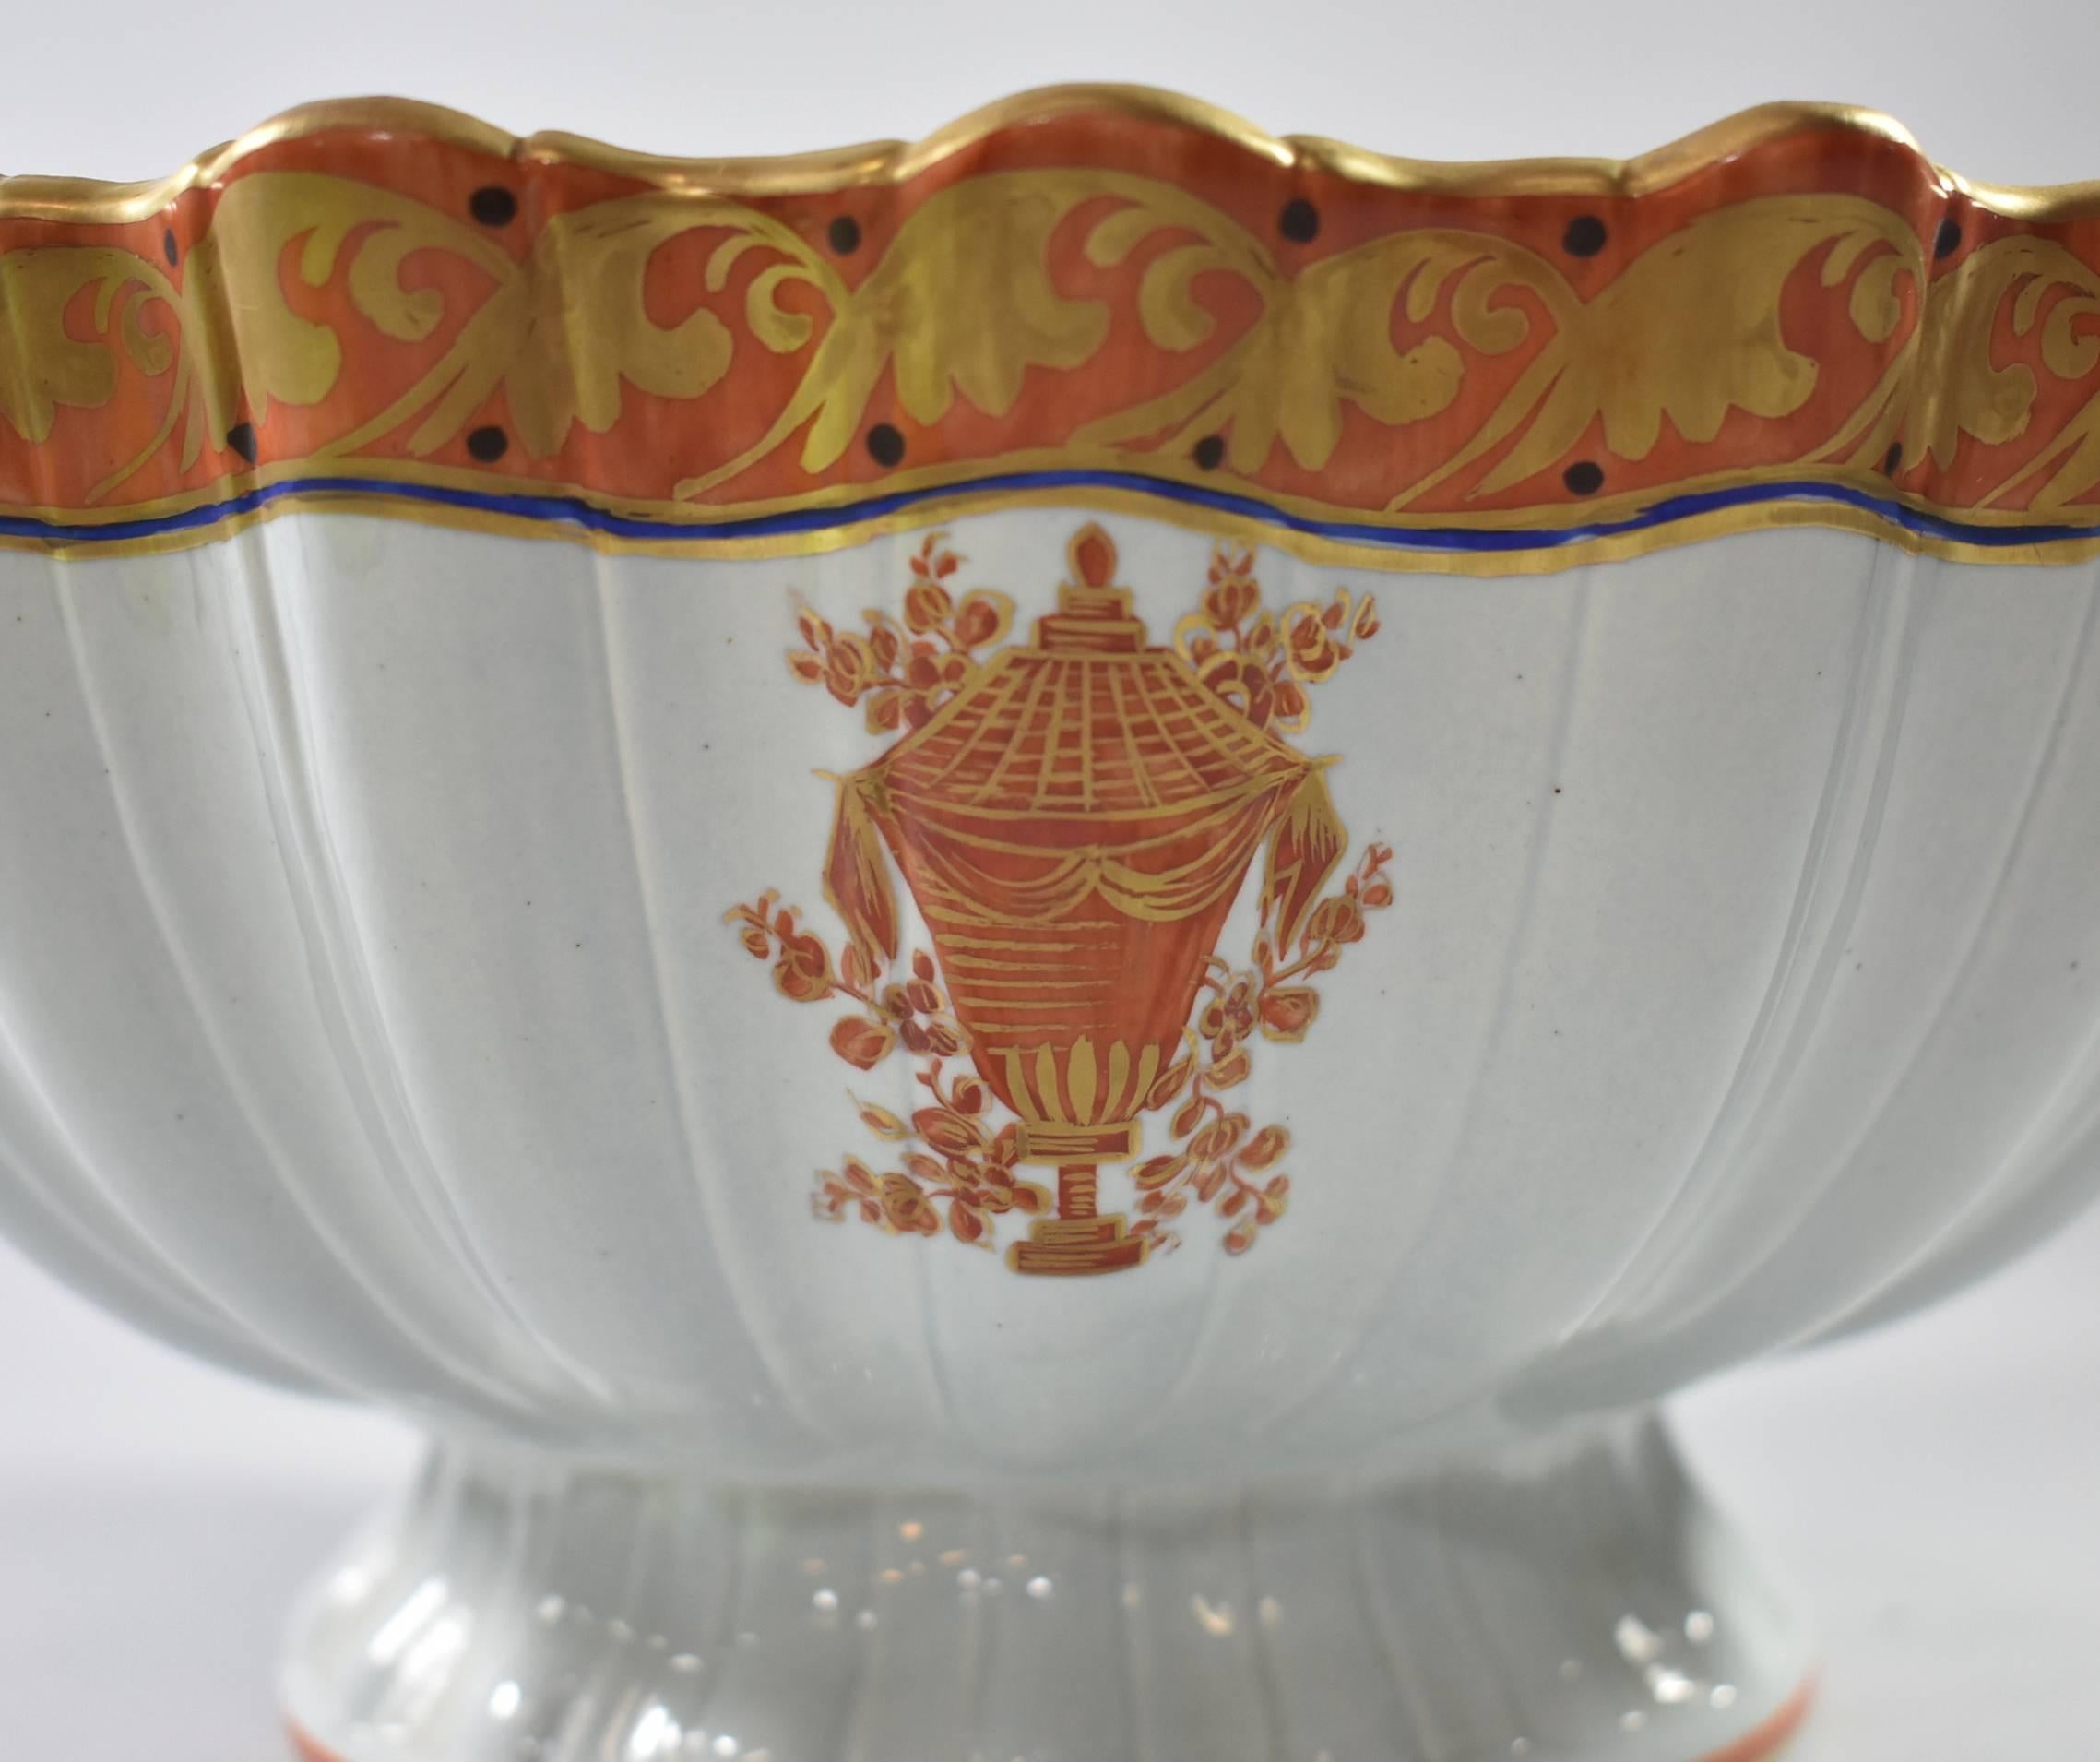 20th Century Italian Porcelain Orange and Gold Detail Footed Bowl Scalloped Edge, Mottahedeh